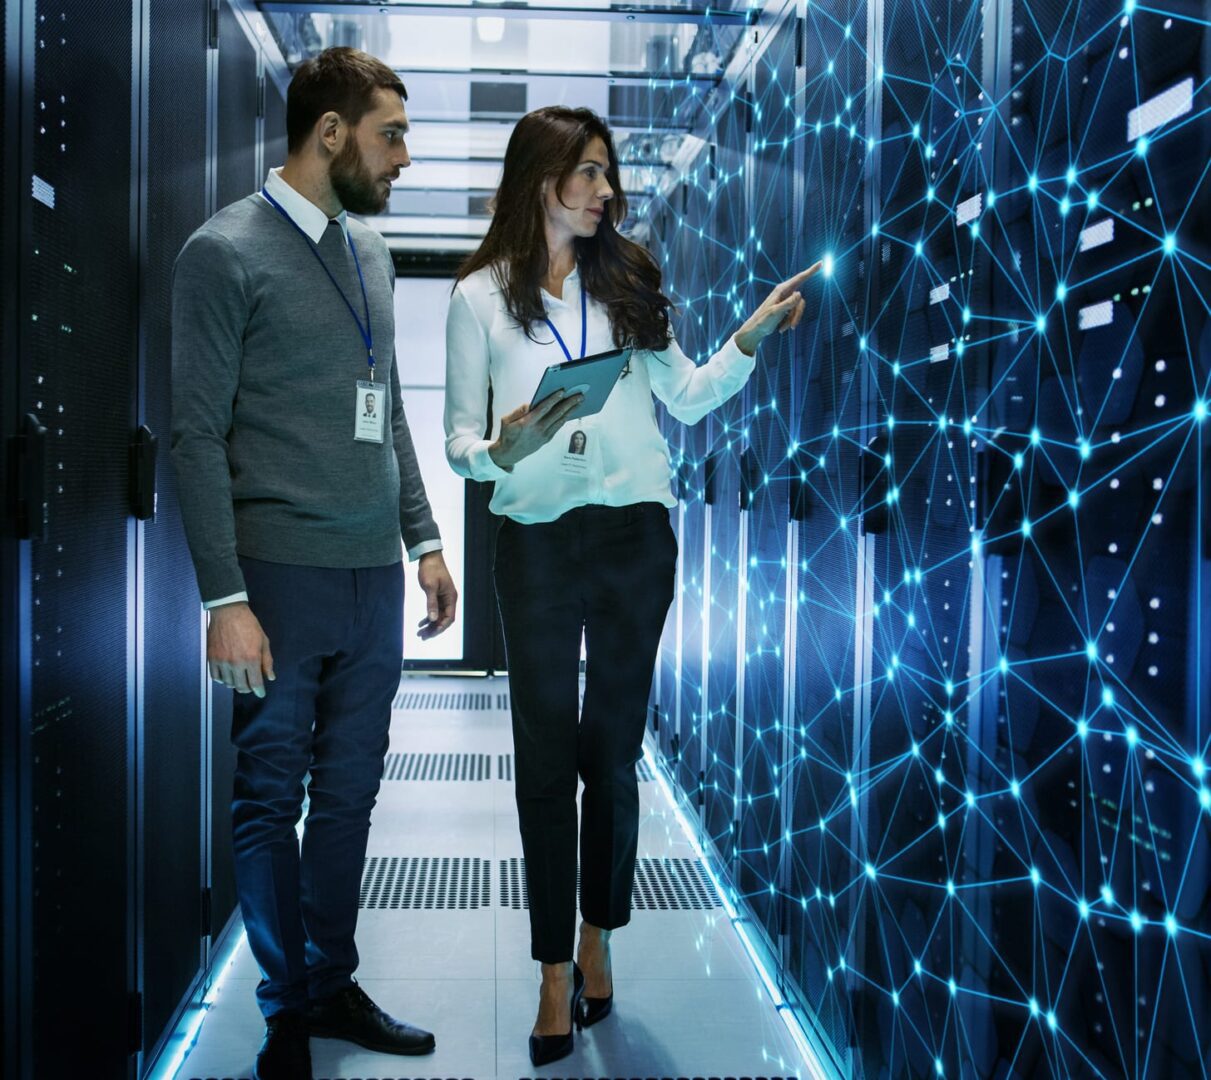 Female and Male IT Engineers Discussing Technical Details in a Working Data Center/ Server Room with Internet Connection Visualization.